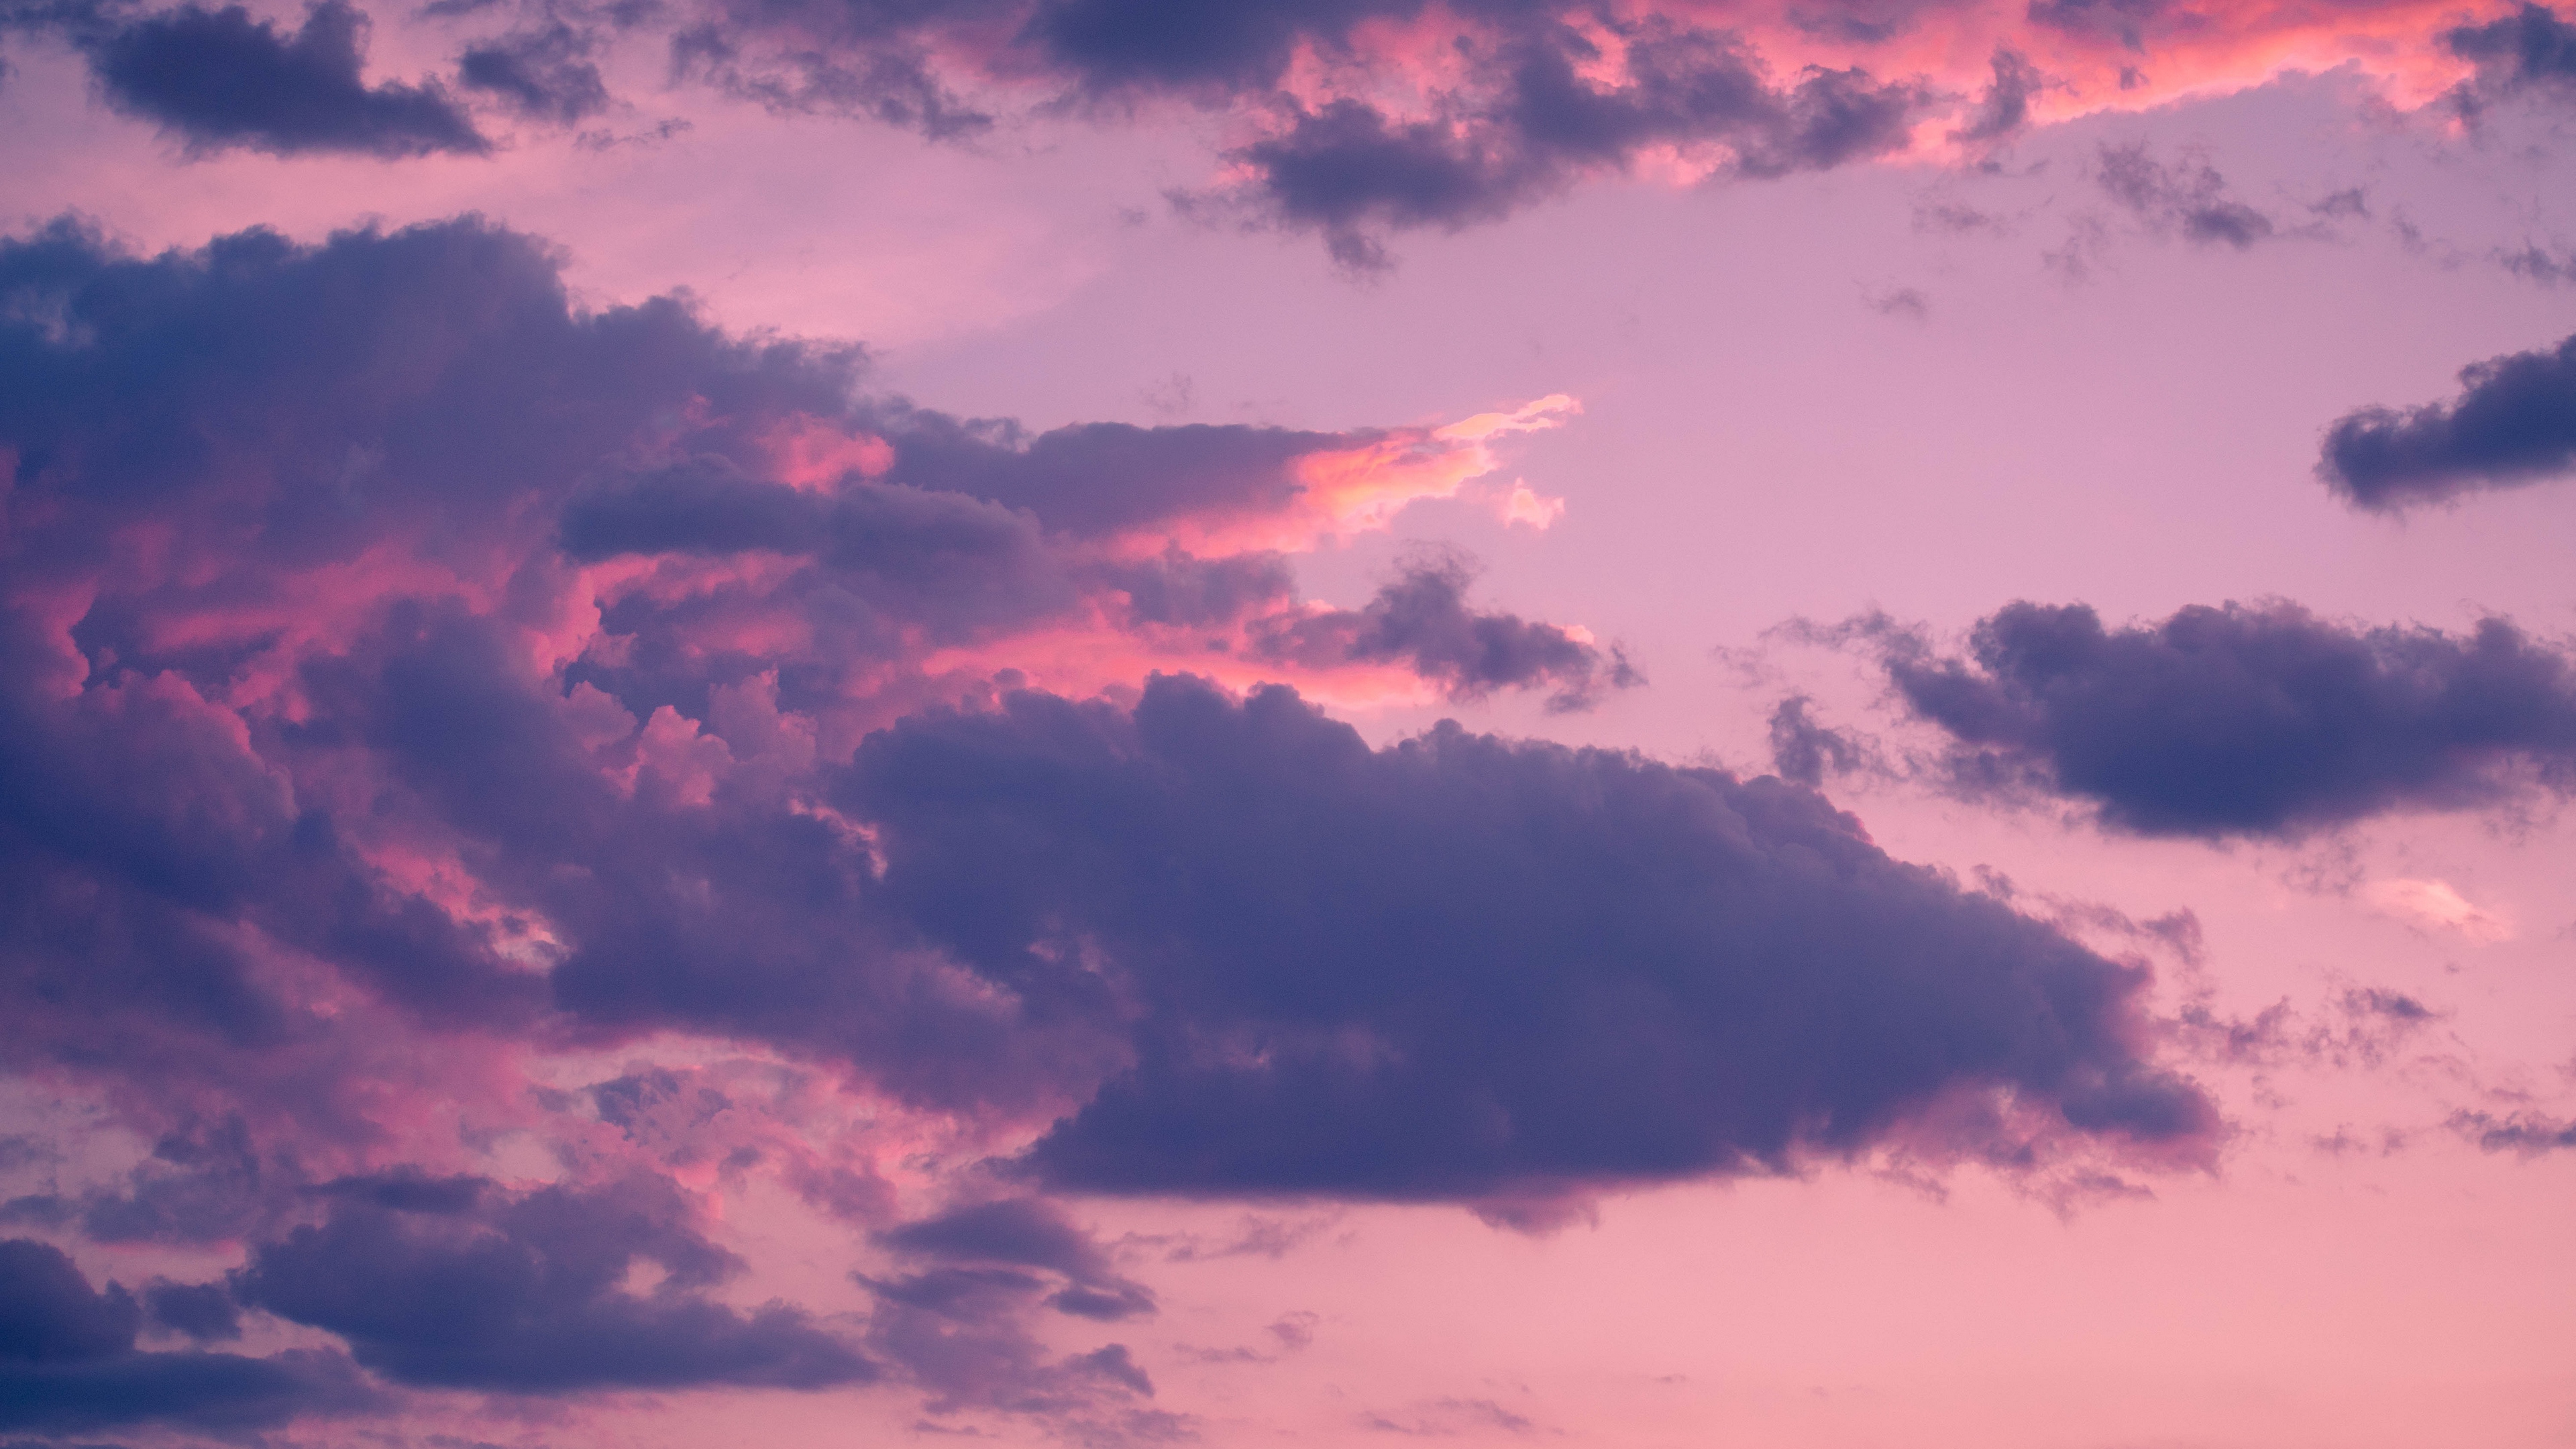 Wallpaper Clouds Porous Sky Sunset Pink Sky Background Hd